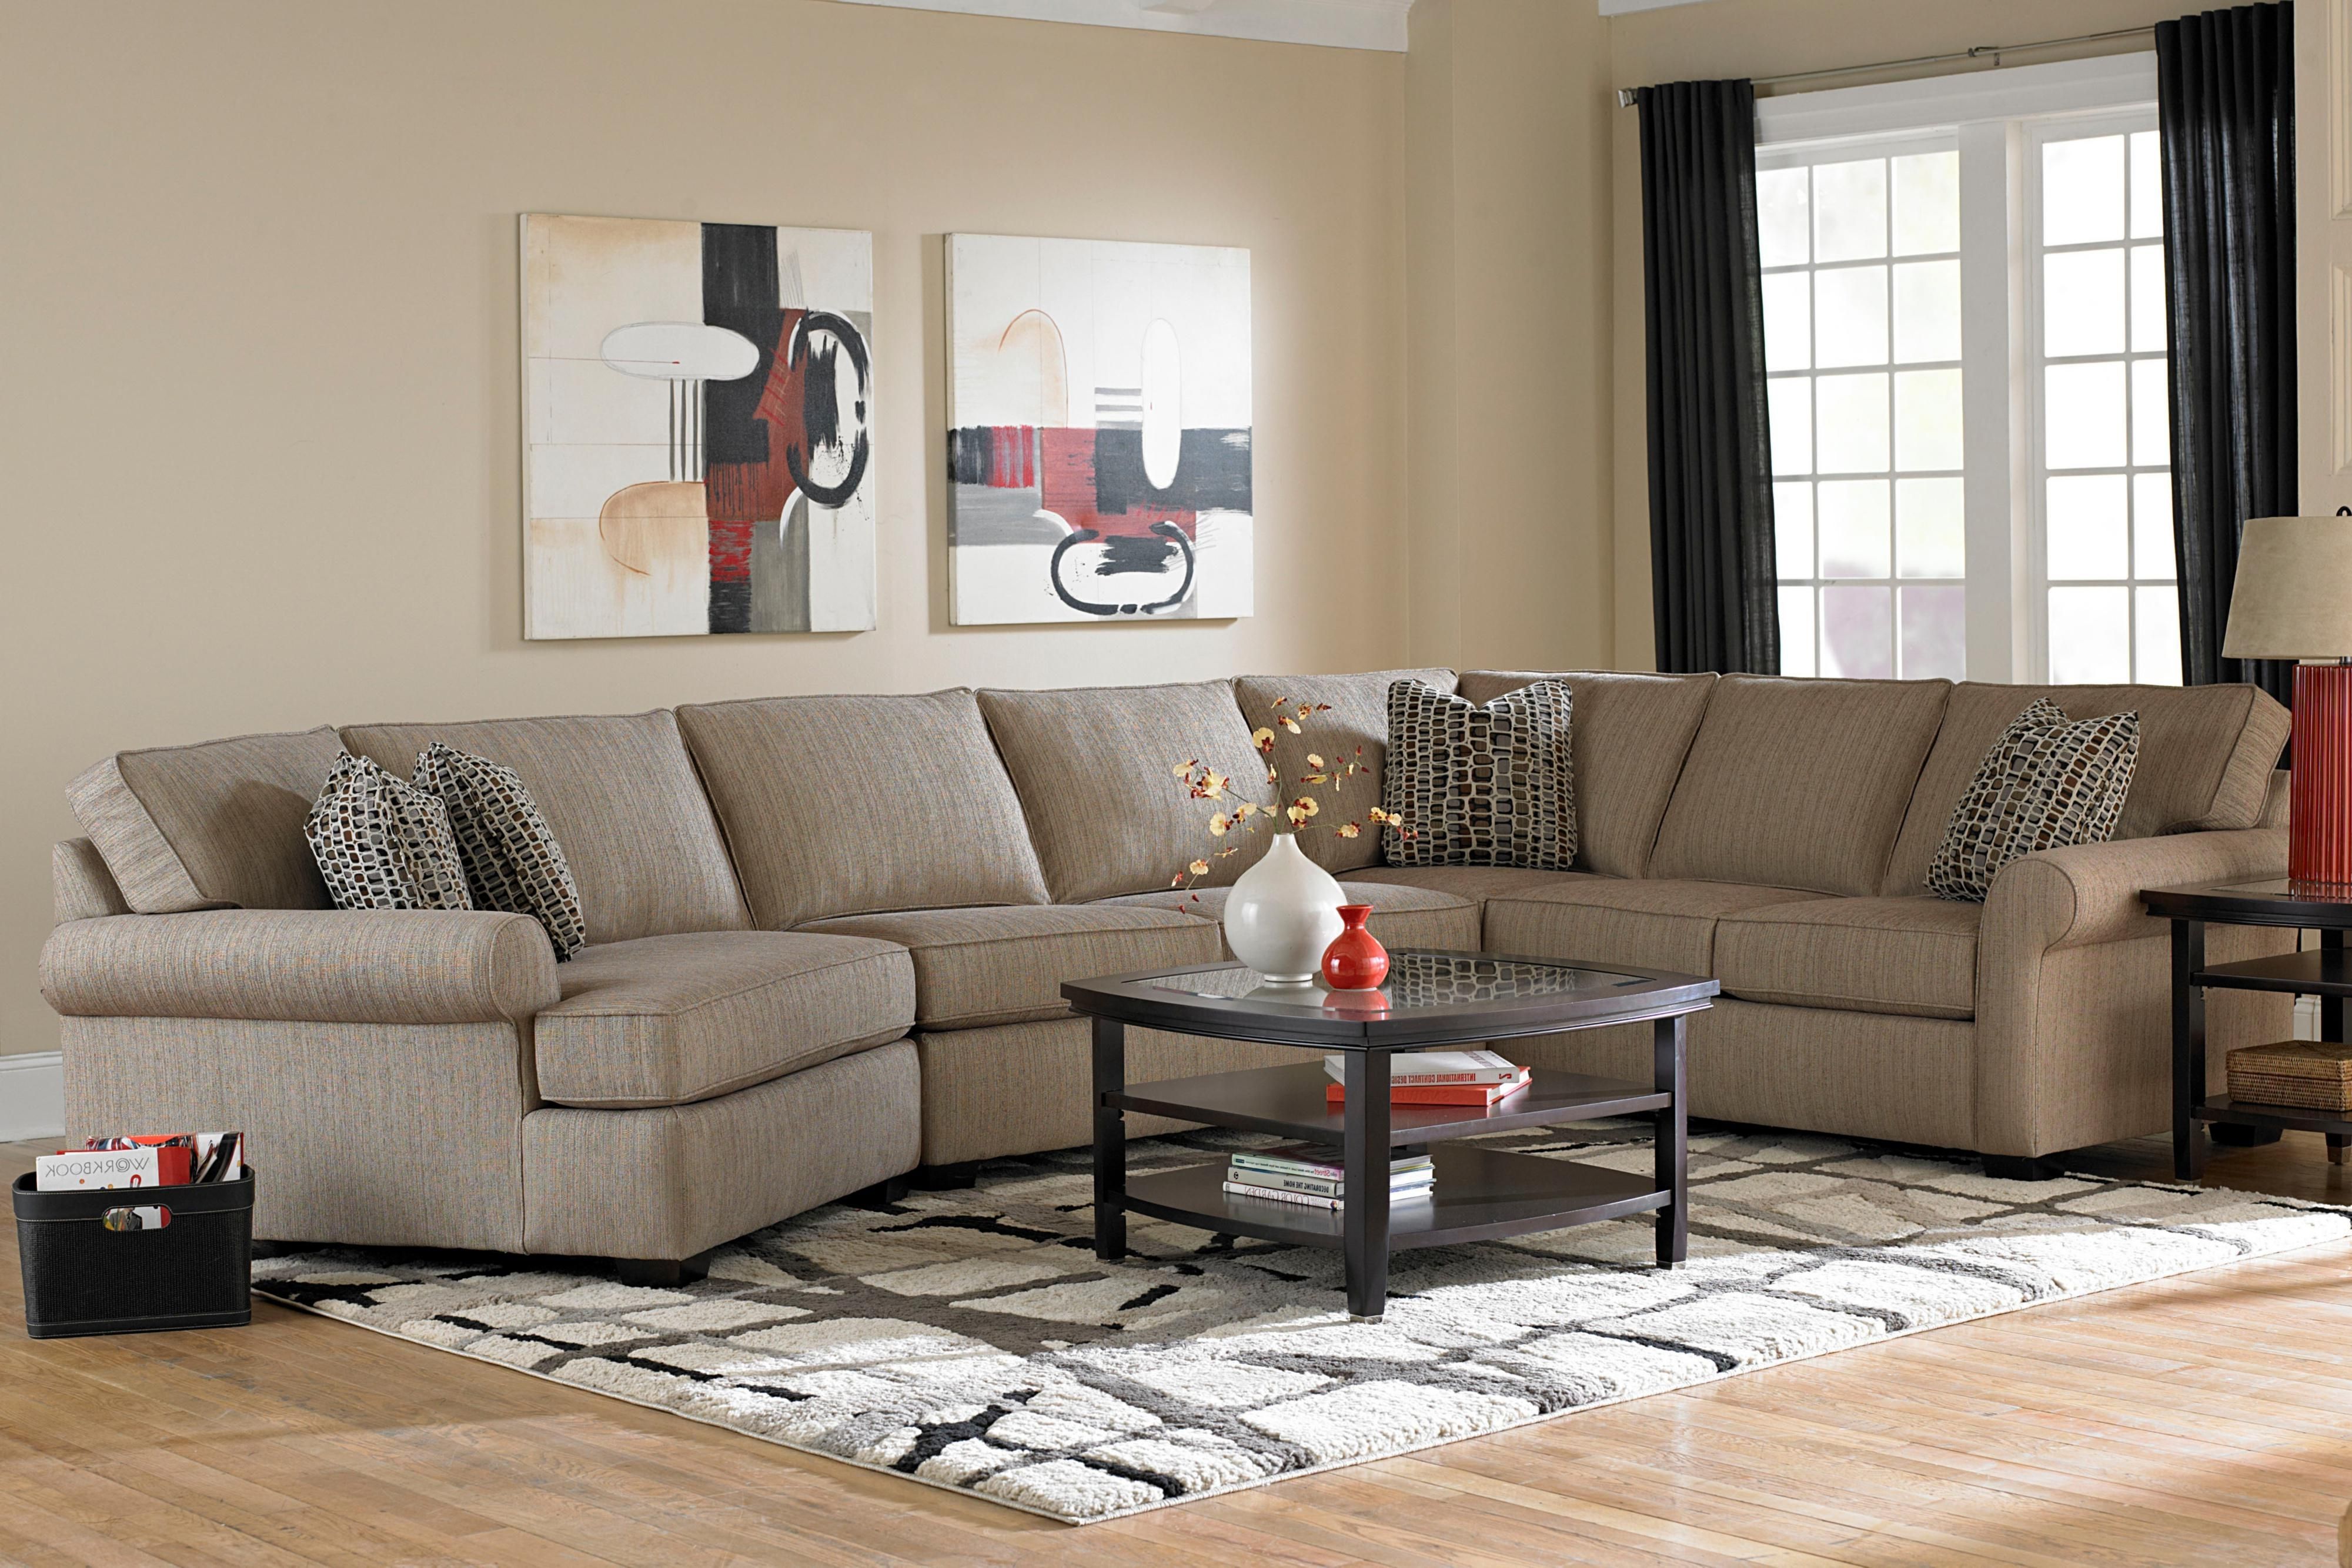 Broyhill Furniture Ethan Transitional Sectional Sofa With Left Throughout Meyer 3 Piece Sectionals With Laf Chaise (View 12 of 30)